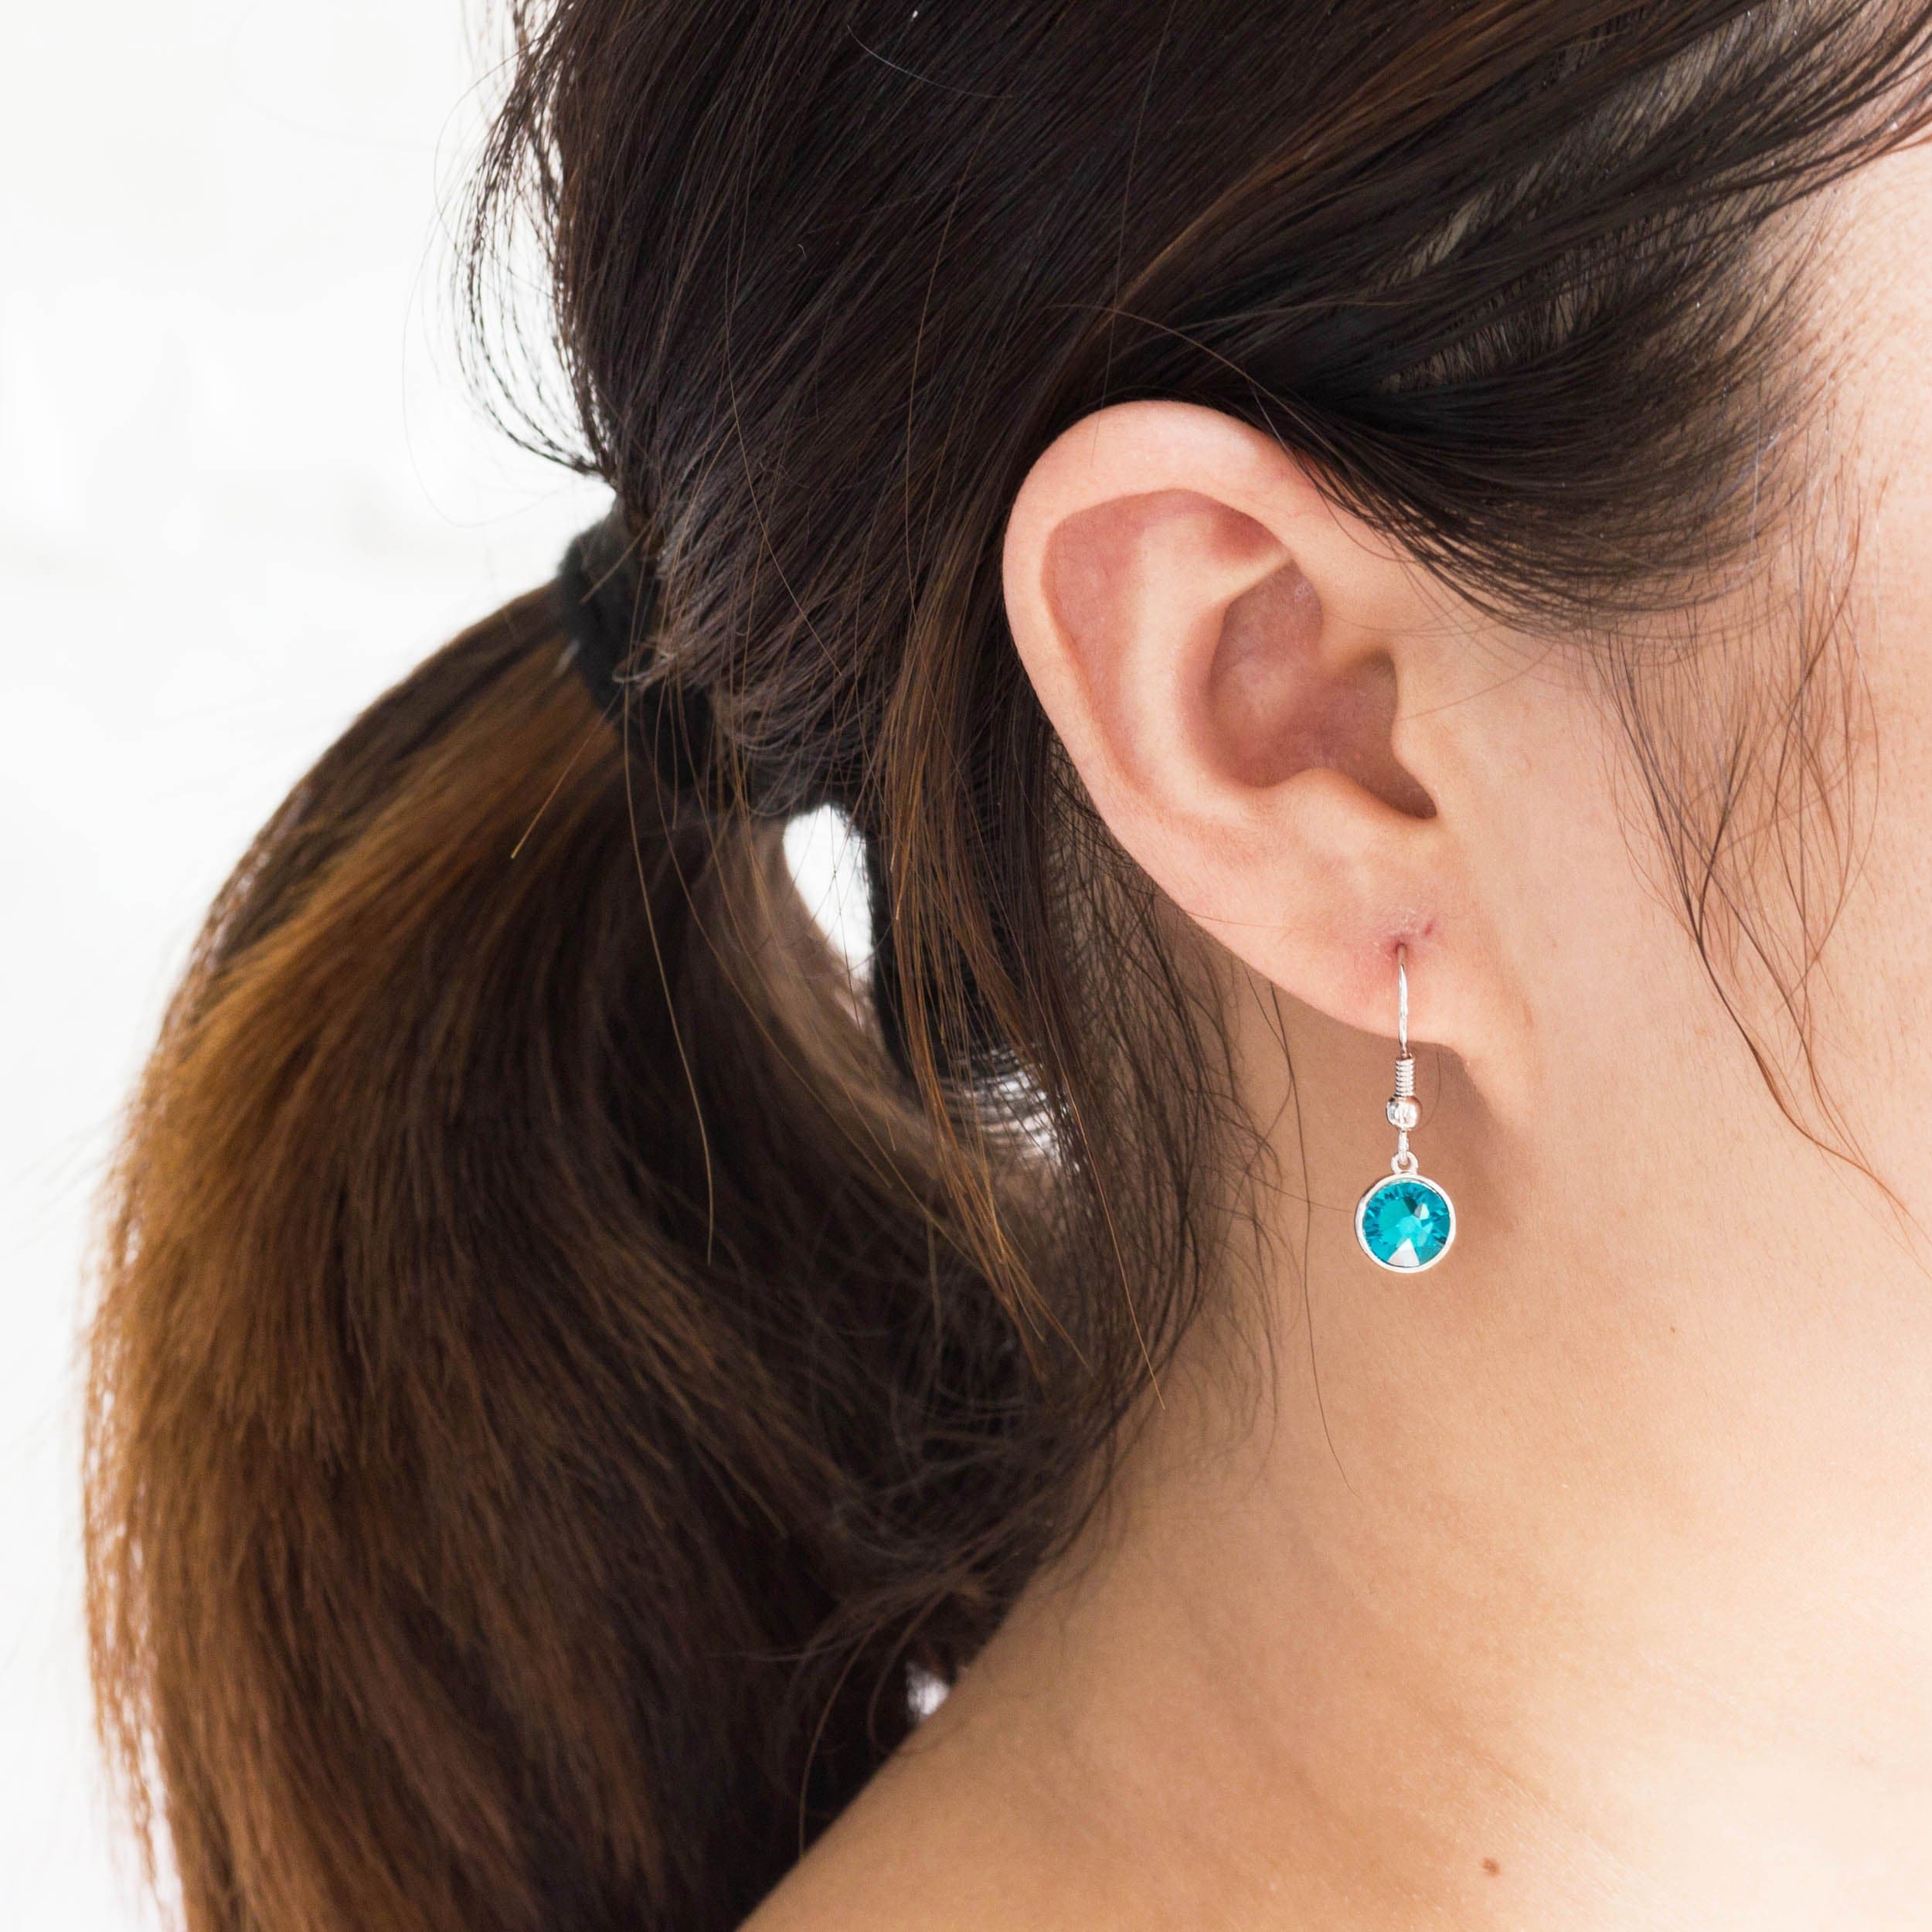 December Birthstone Drop Earrings Created with Blue Topaz Zircondia® Crystals